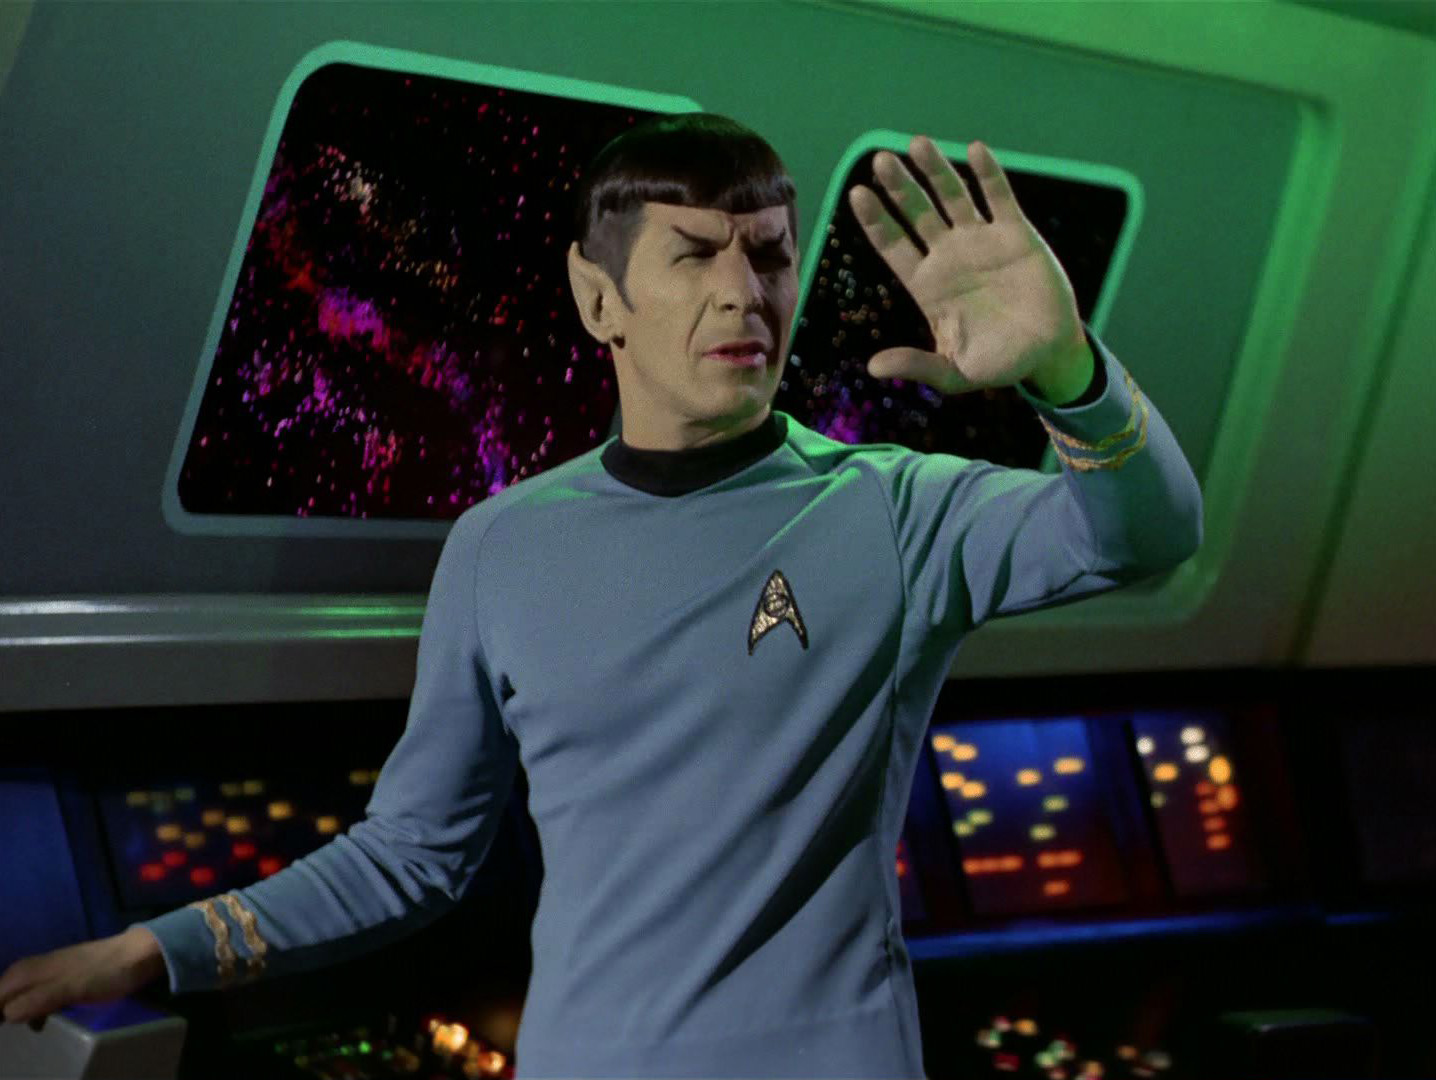 Spock is affected.